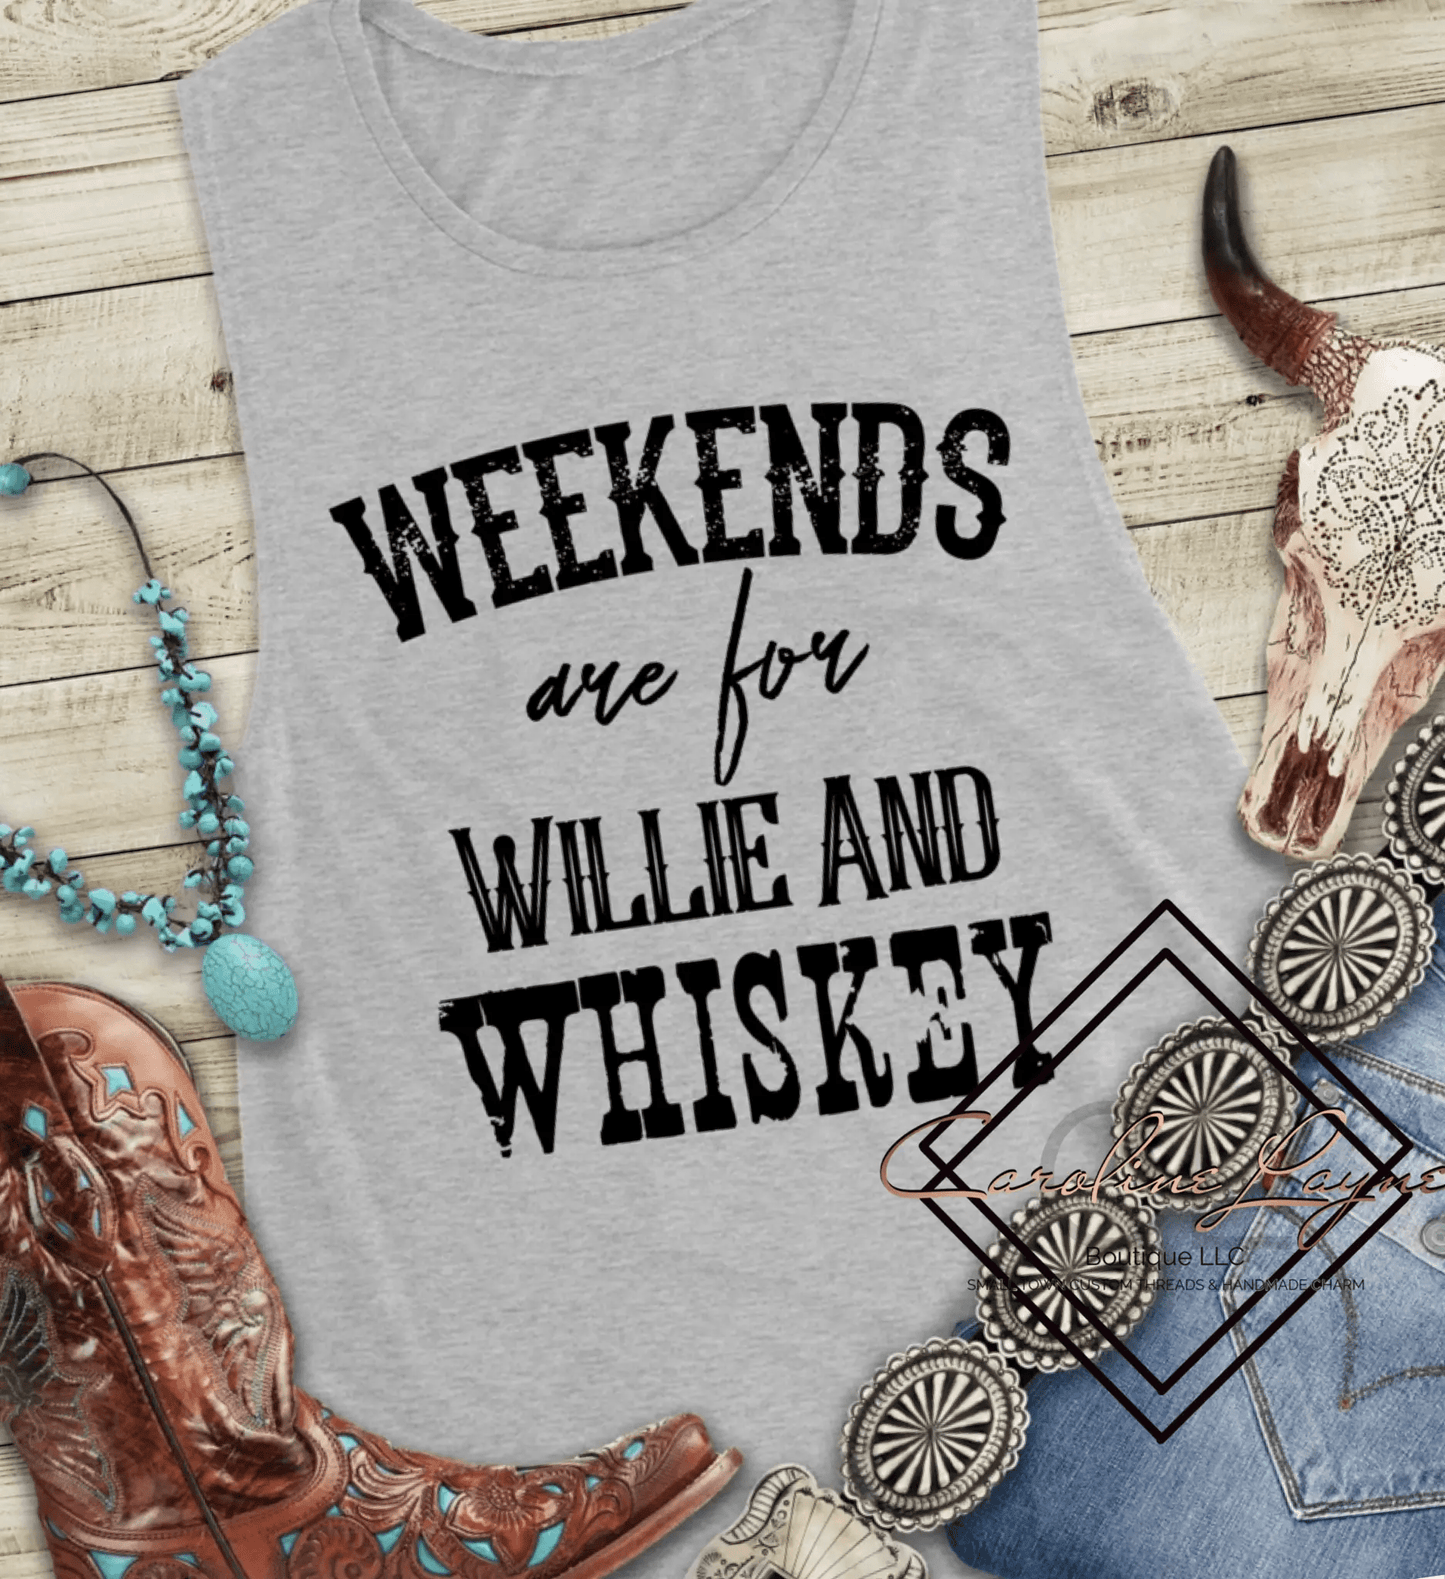 Weekends Are For Willie And Whiskey Tank - Caroline Layne Boutique LLC